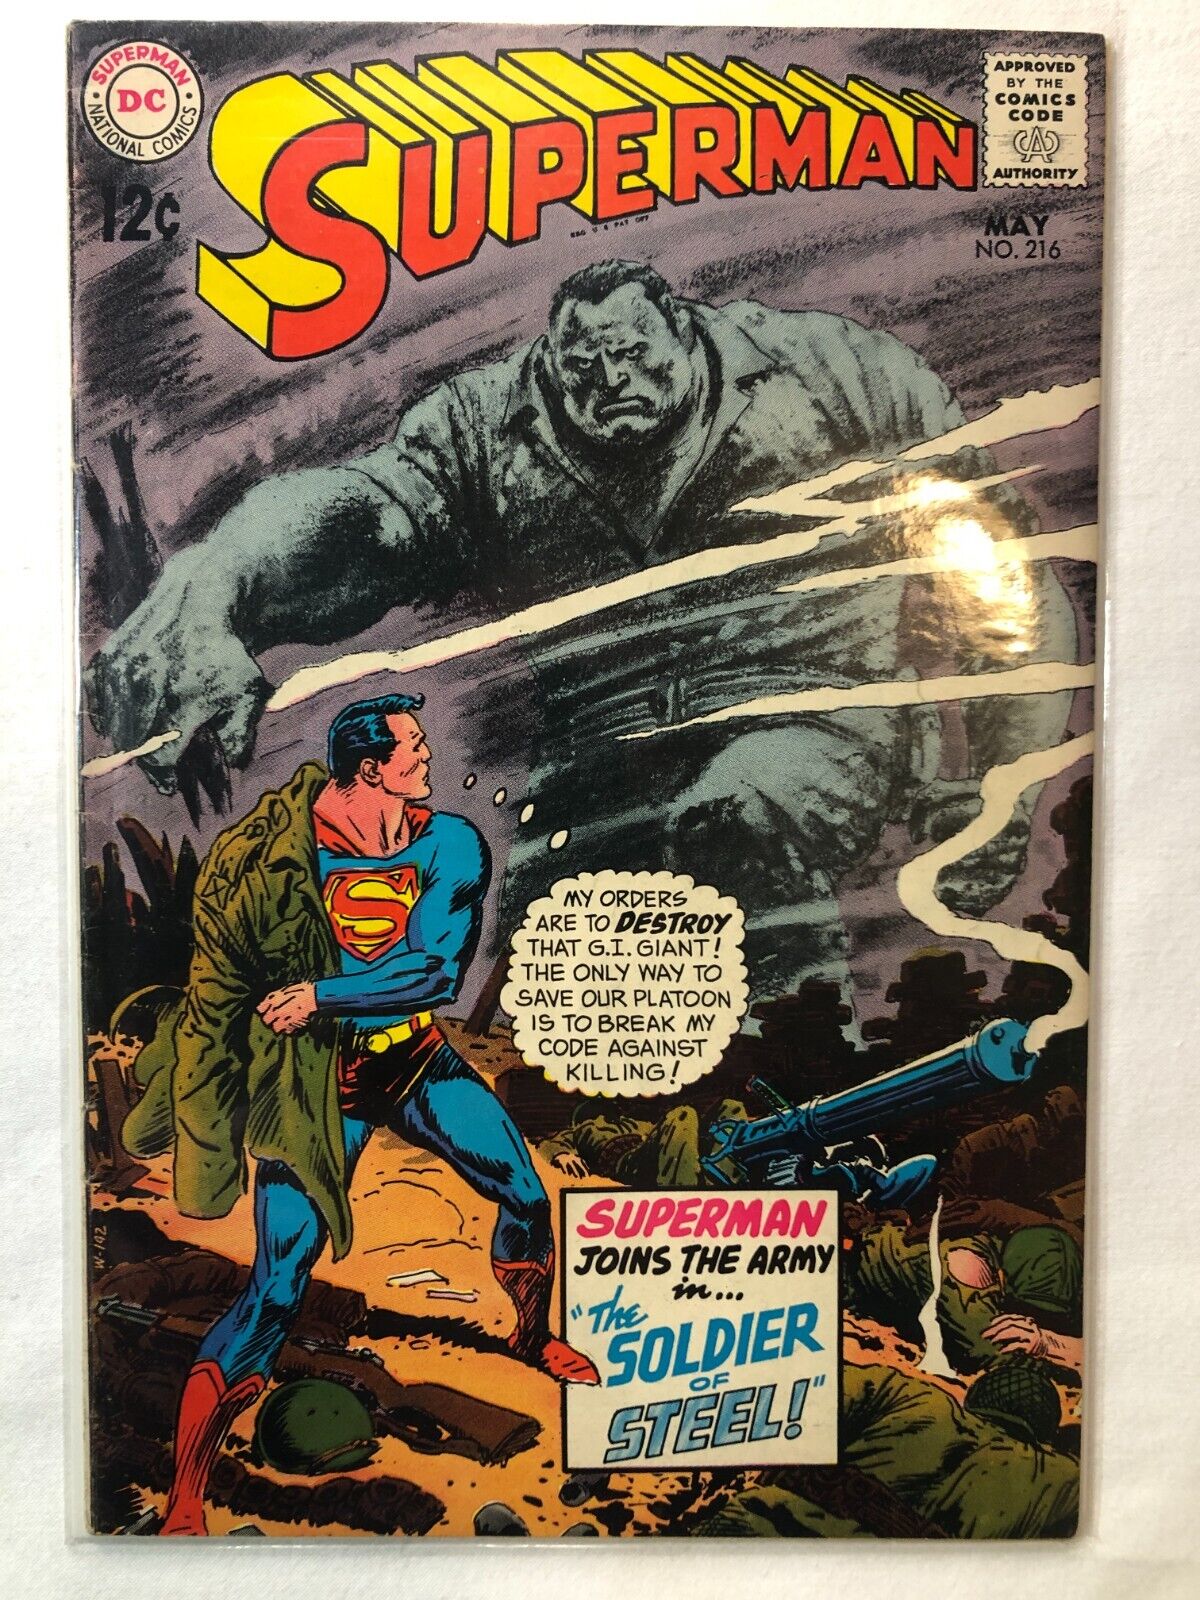 Superman #216 May 1969 Vintage Silver Age DC Comics Very Nice Condition